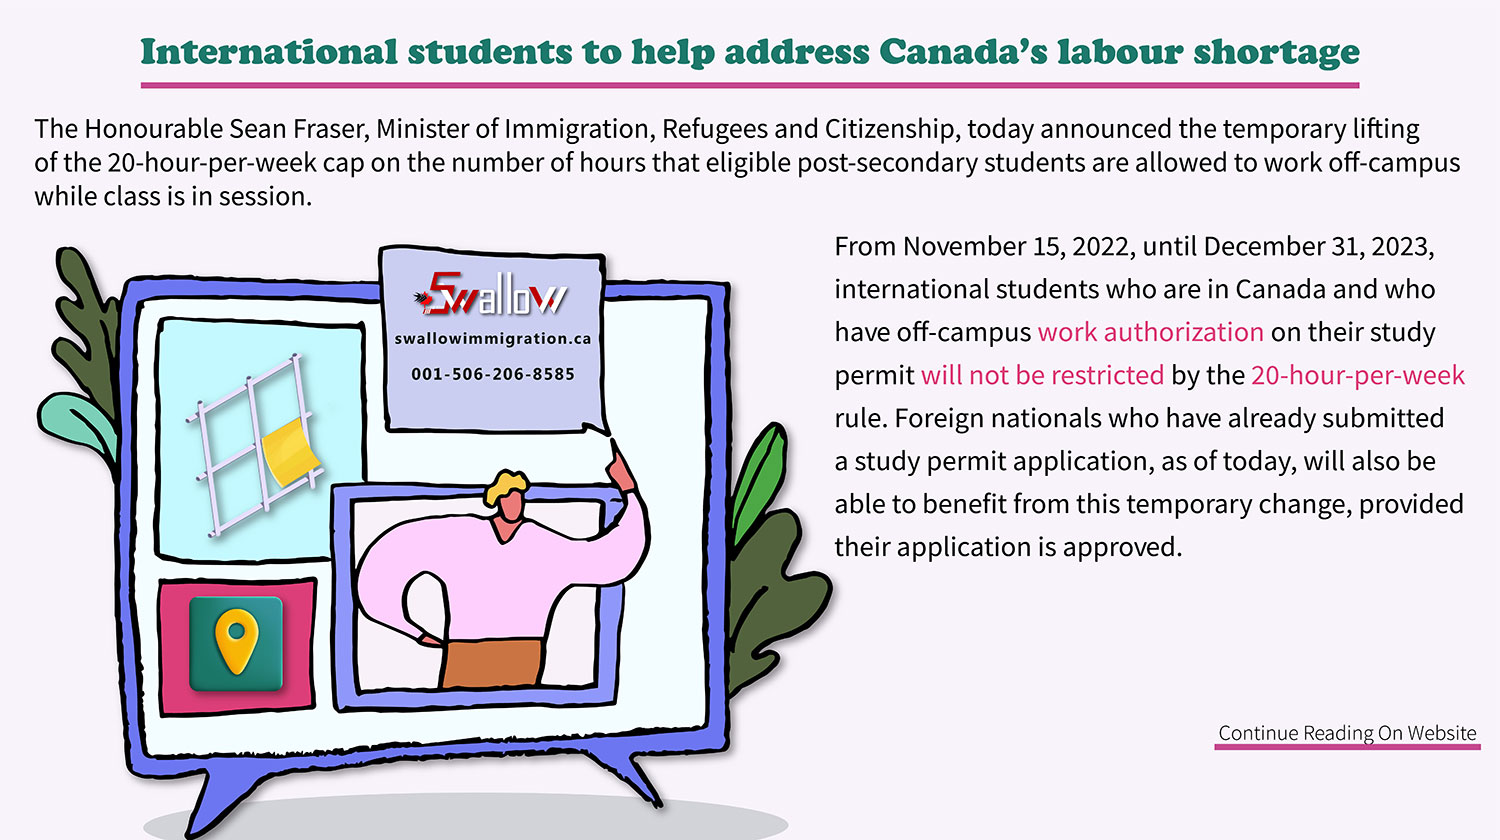 International students to help address Canada’s labour shortage